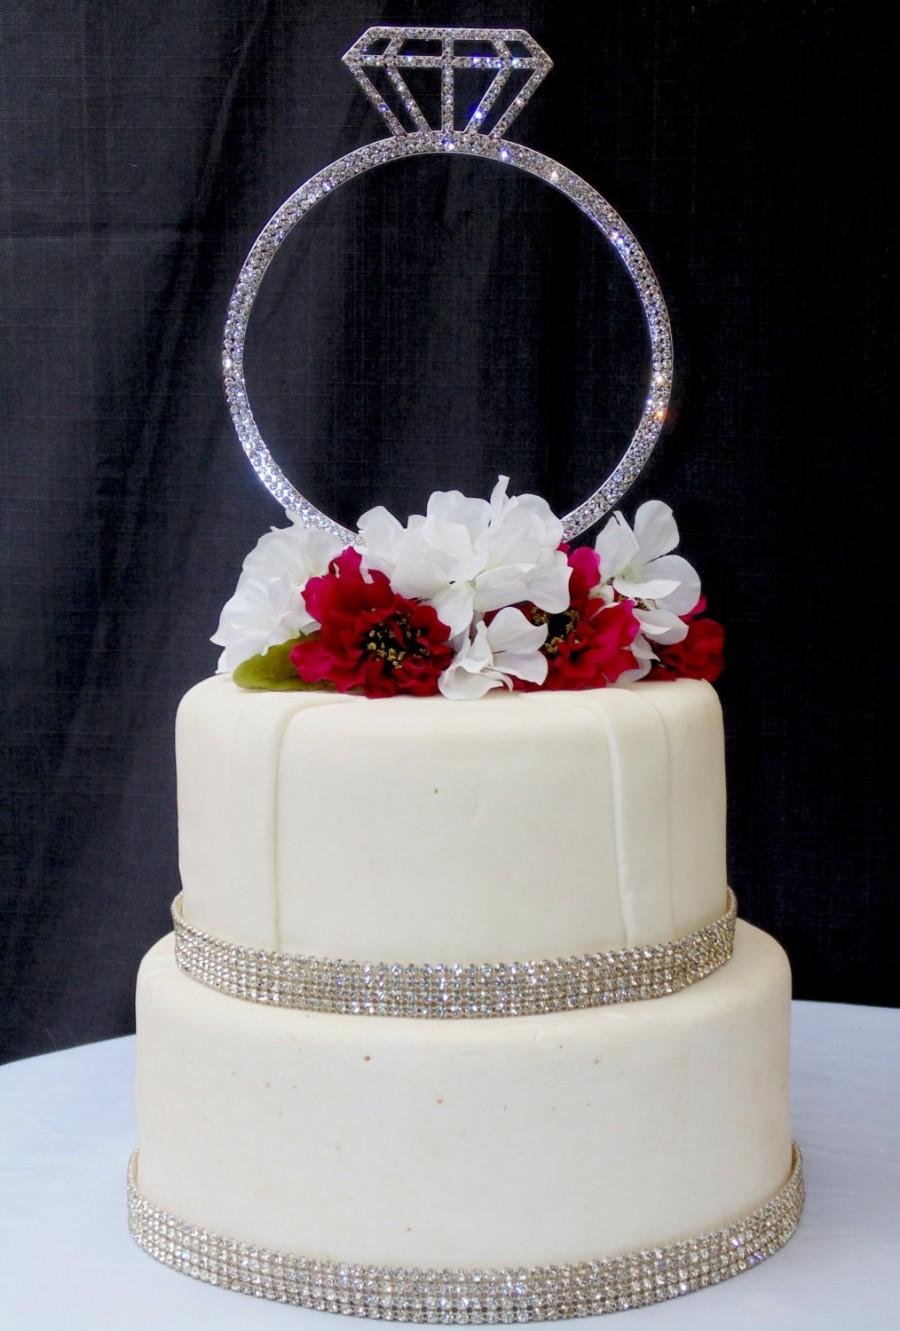 Hochzeit - Single Extravagant Large Silver Rhinestone Wedding Ring Cake Topper by Forbes Favors